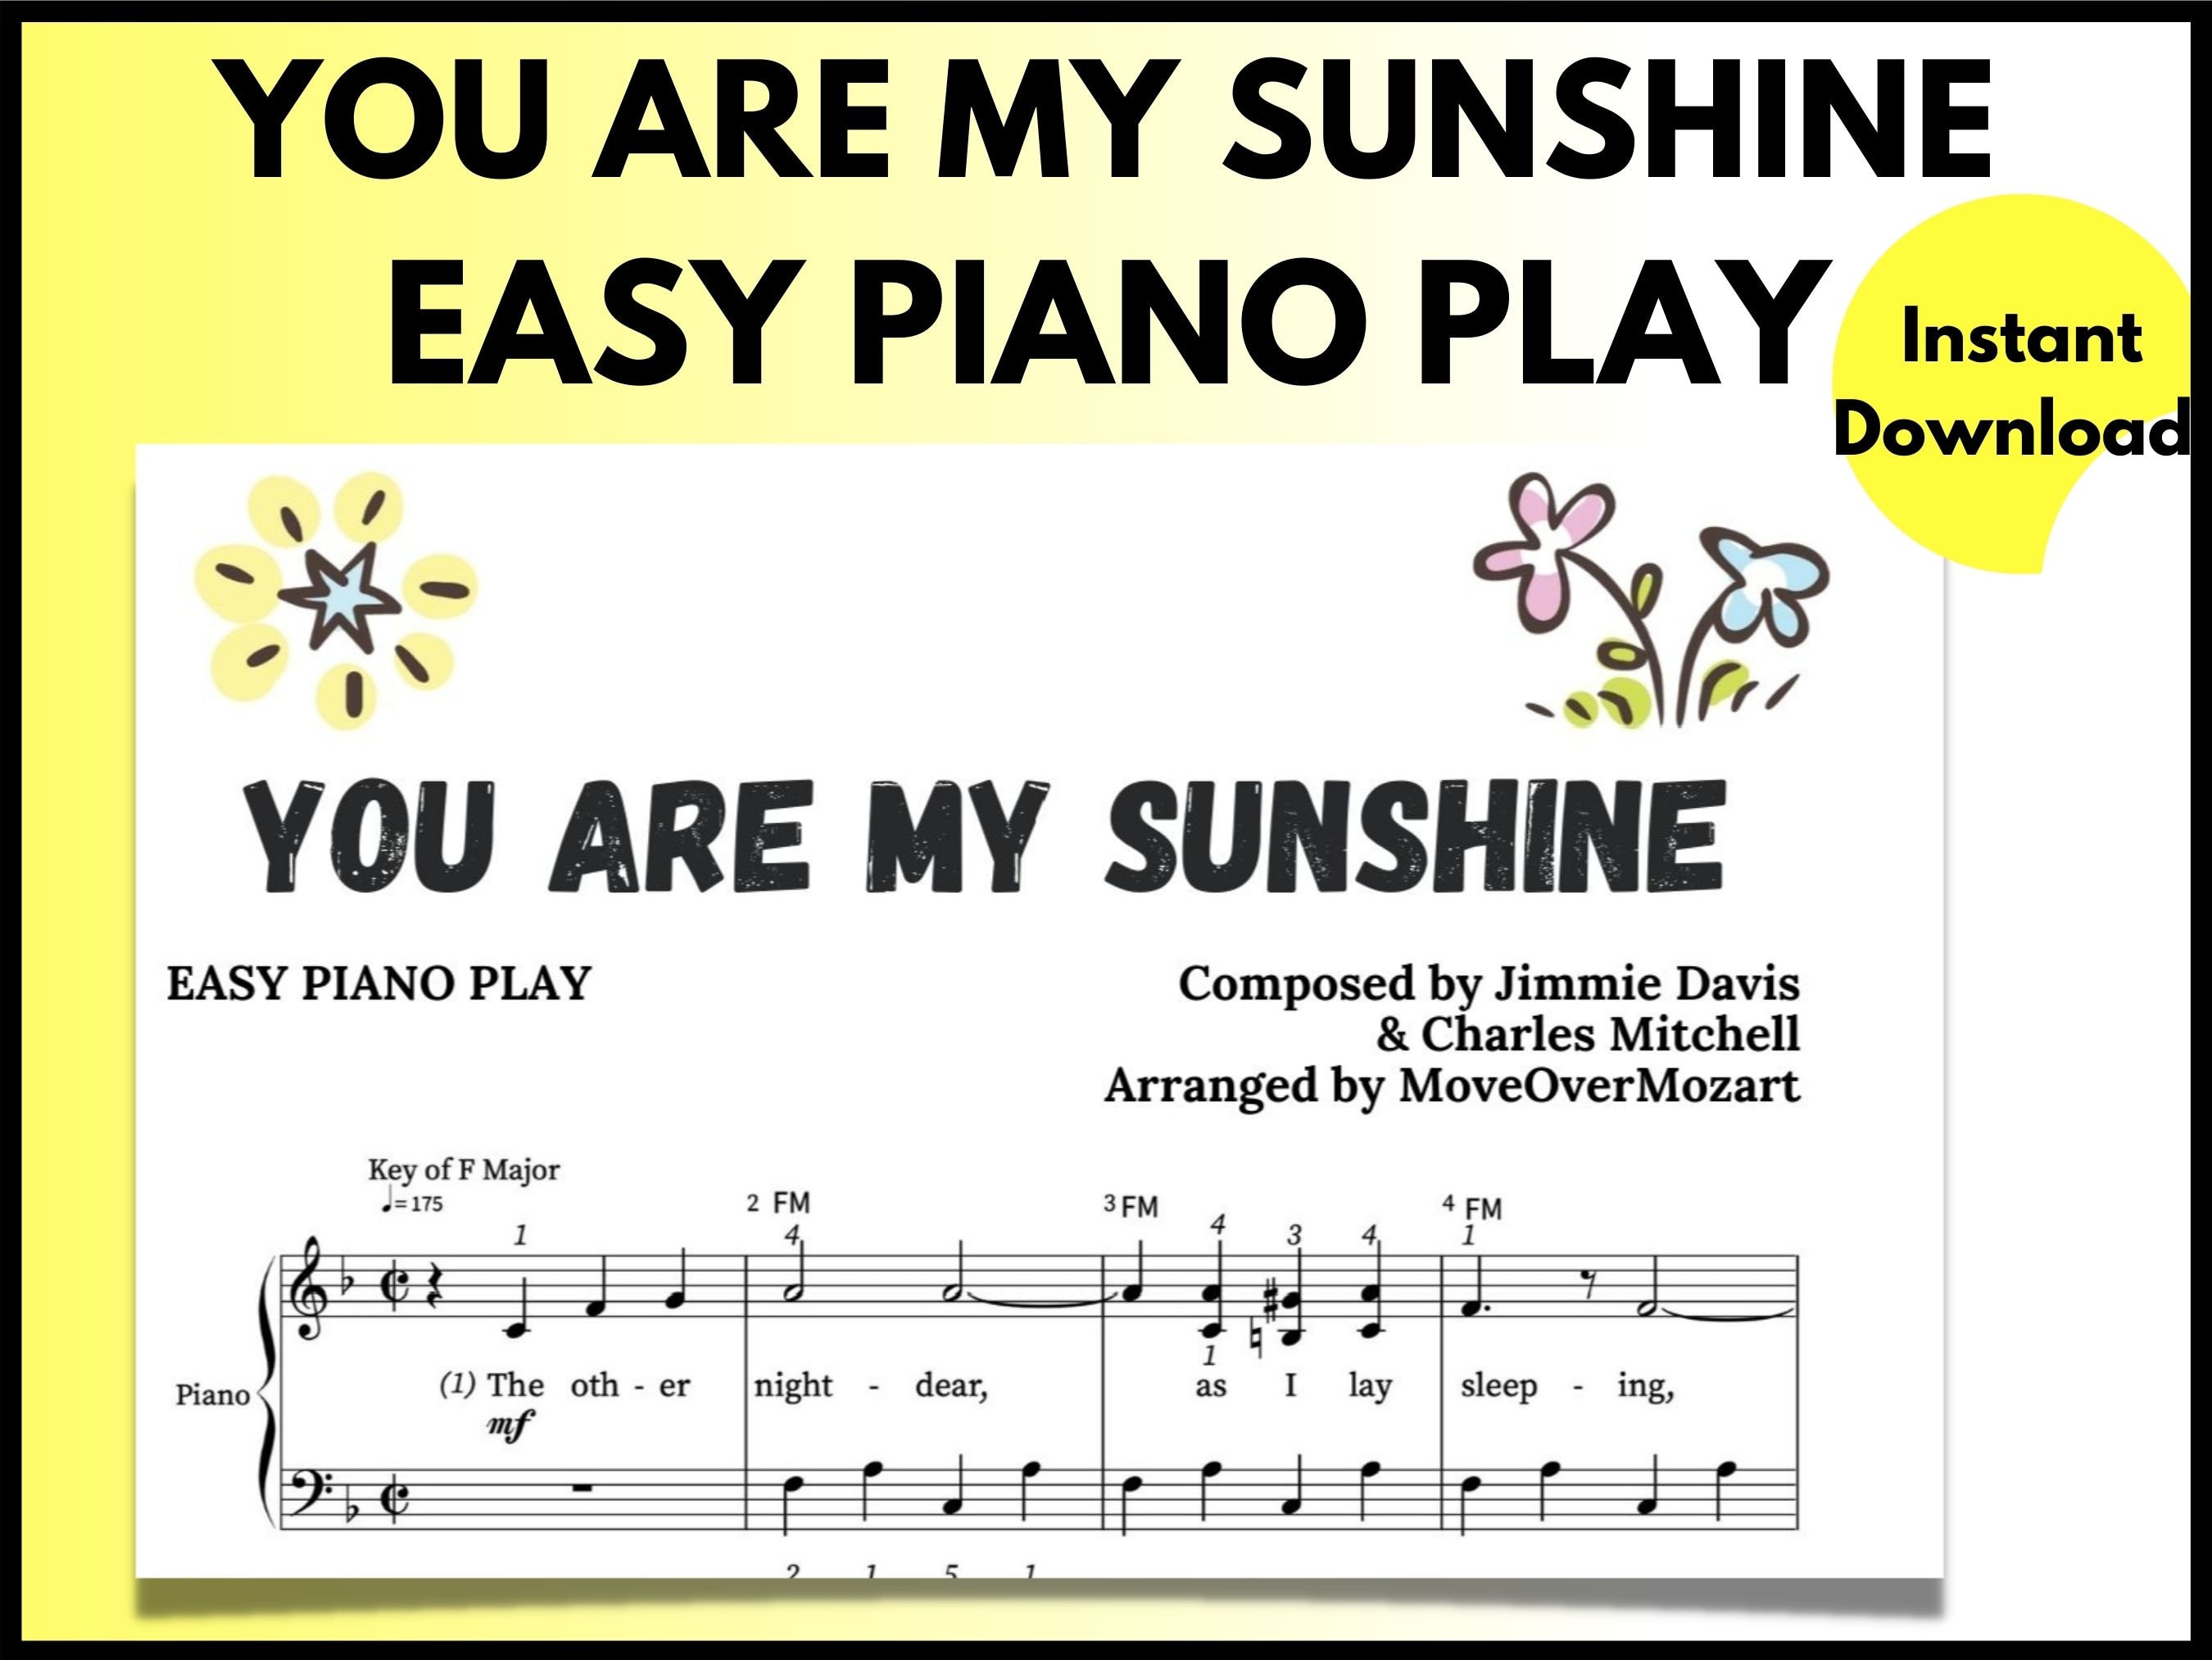 Just Shapes and Beats sheet music  Play, print, and download in PDF or  MIDI sheet music on